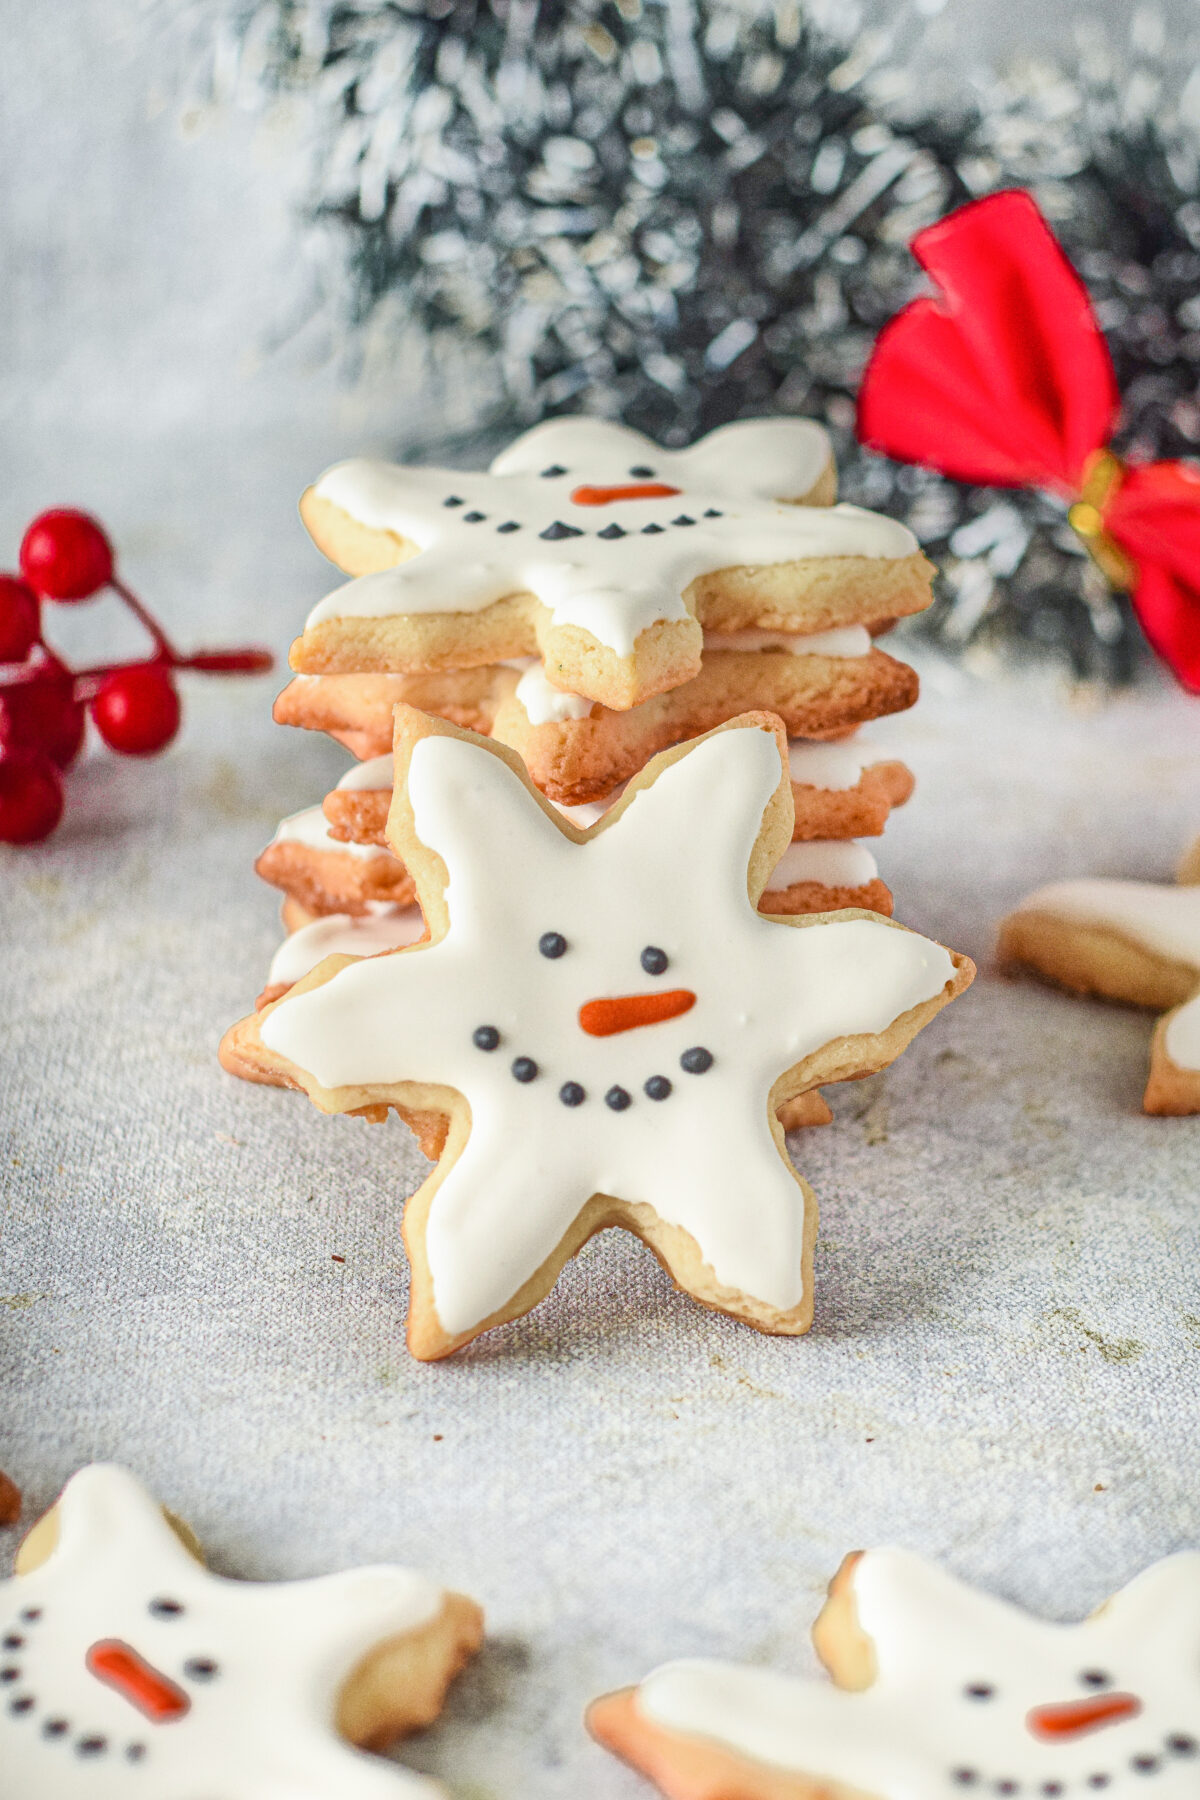 These adorable snowman snowflake cookies are perfect for the holidays! They are a festive addition for your Christmas cookie platter.